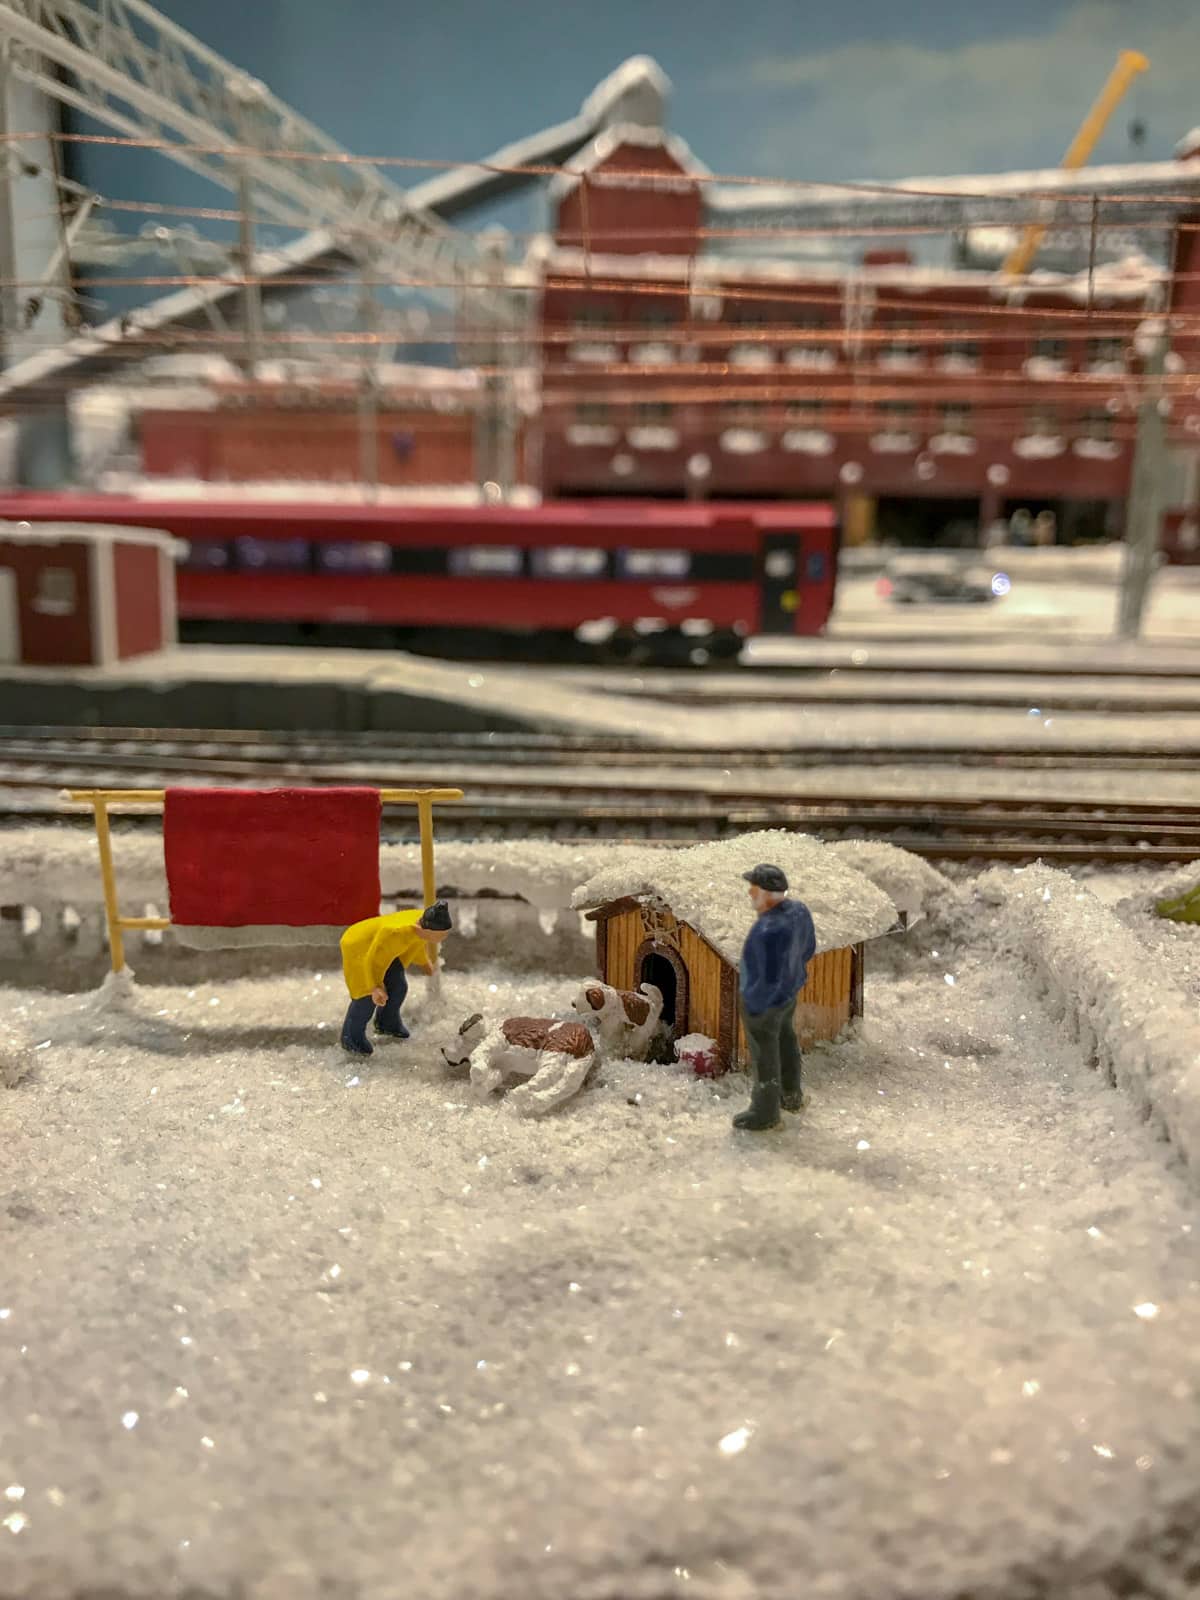 Miniature figurines in a scenario where a man is bending over looking at a dog lying in the snow